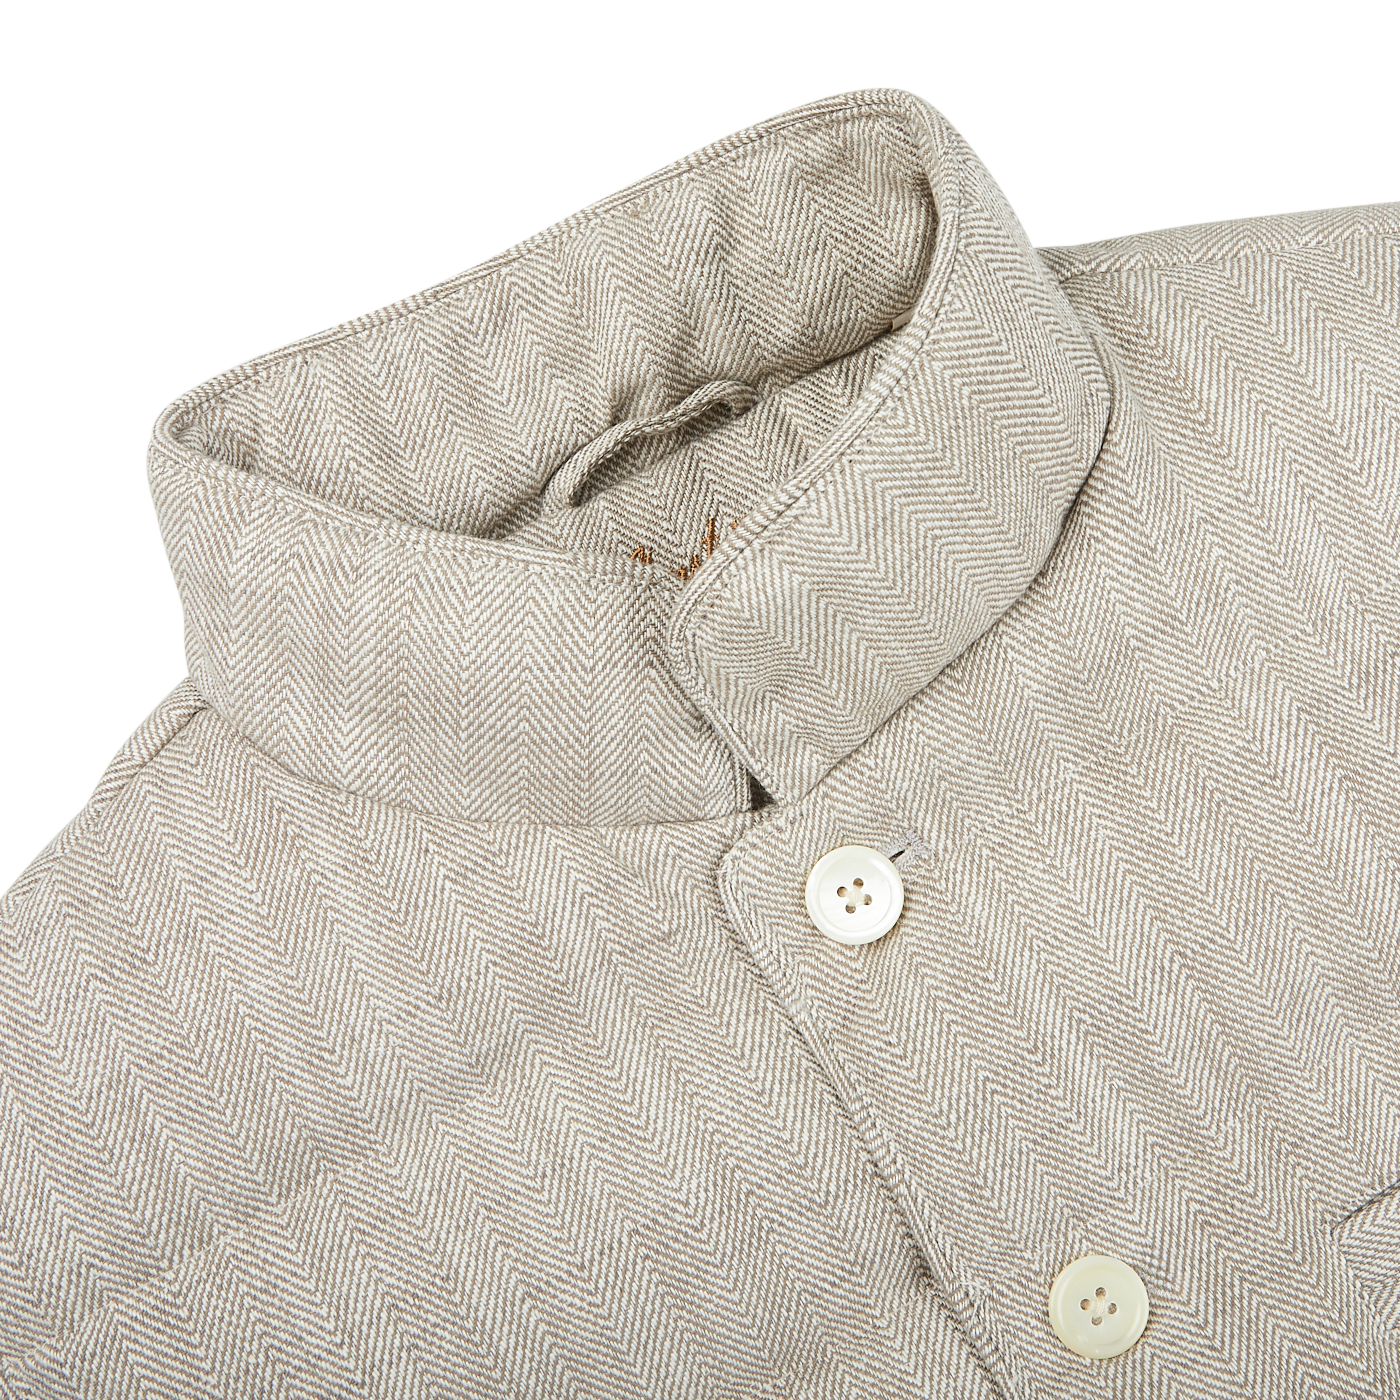 A beige linen jacket with front buttons, ideal for layering or as a lightweight outerwear option by Stenströms.